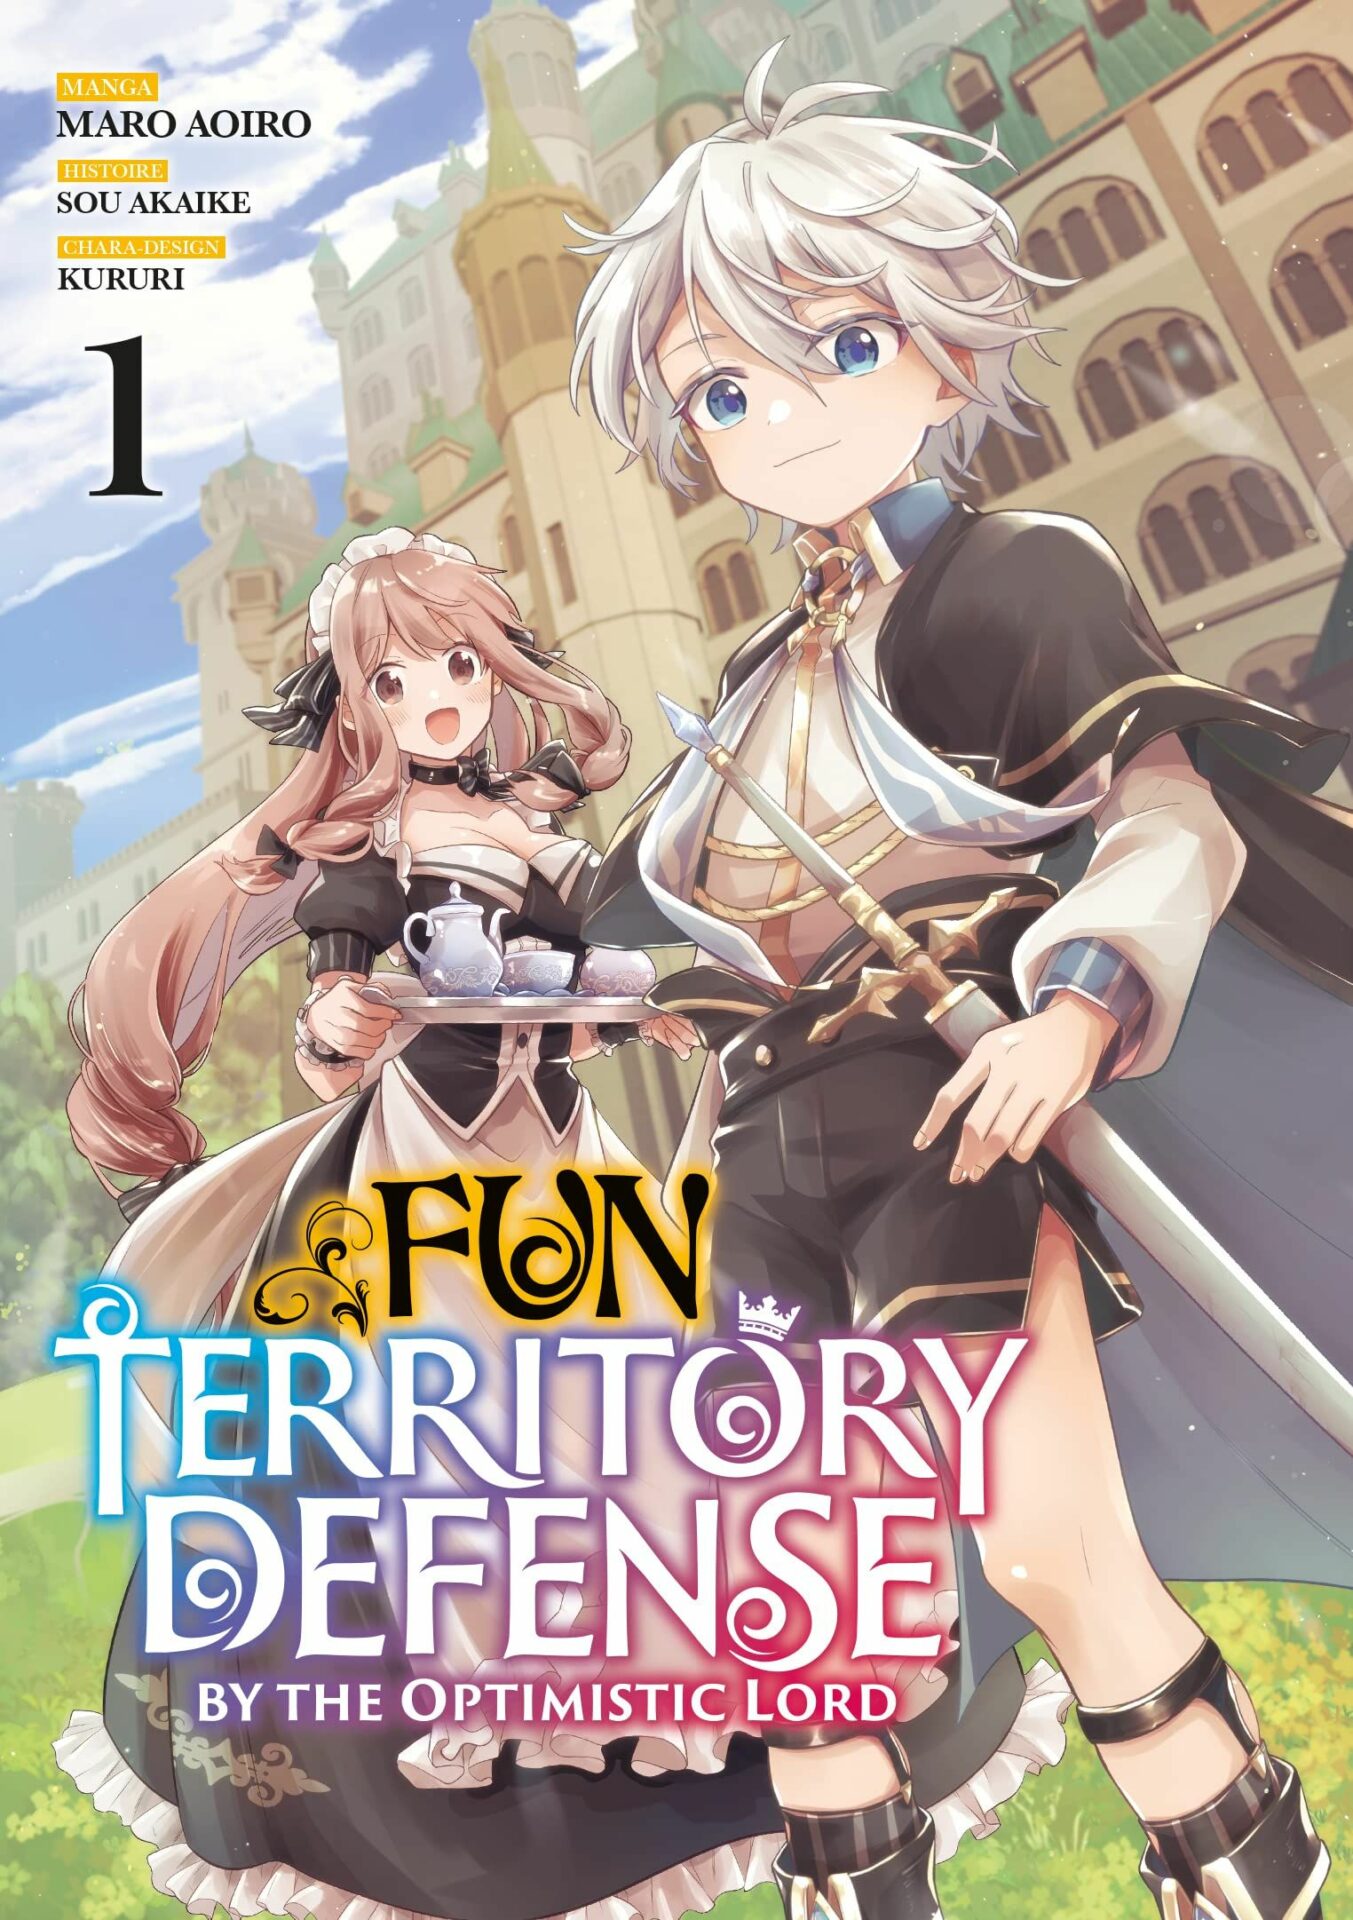 Fun Territory Defense by the Optimistic Lord Vol.1